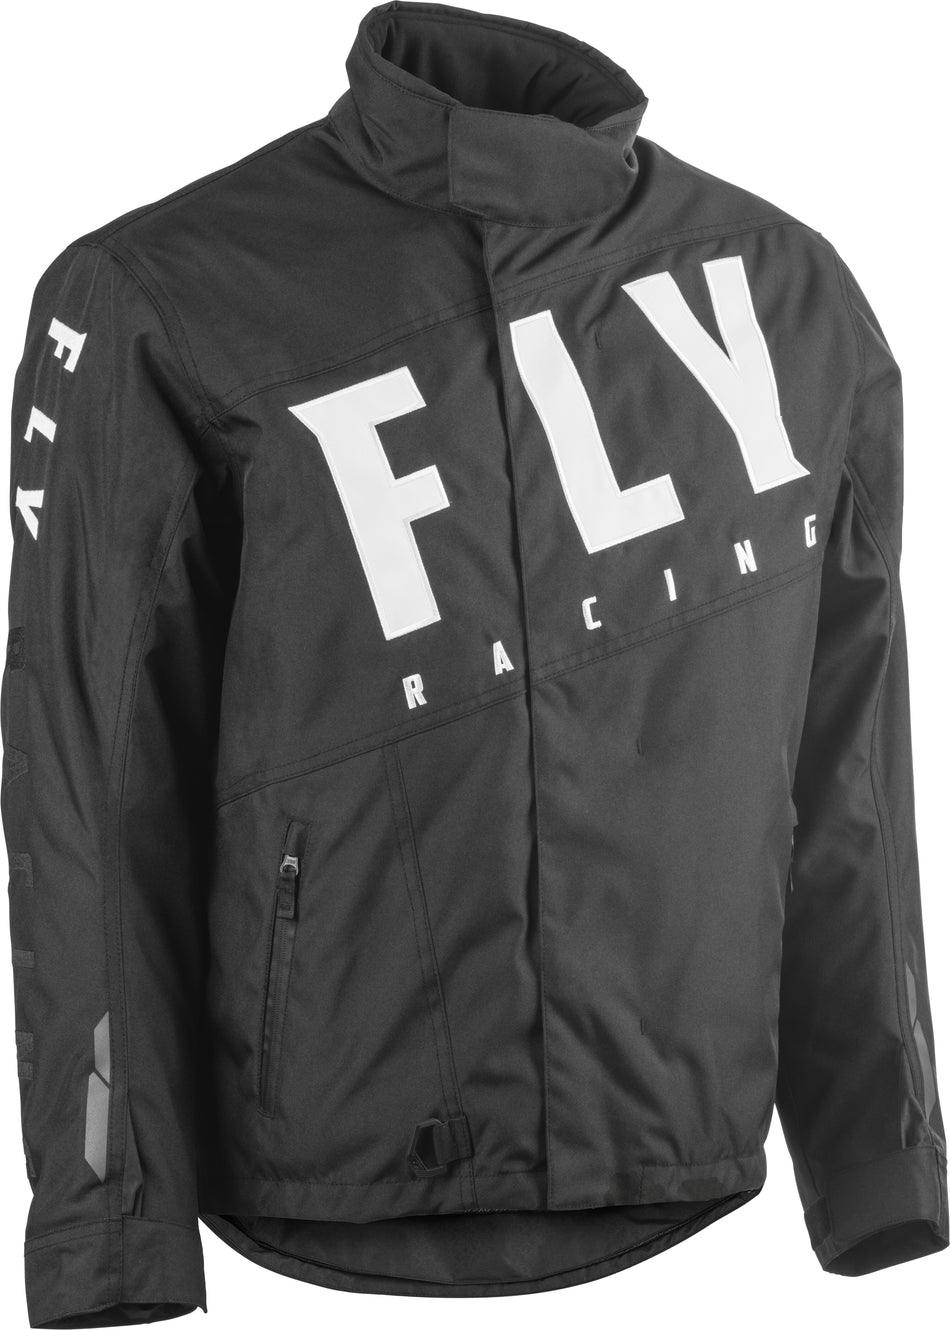 FLY RACING Fly Snx Pro Jacket Black Yl 470-4110YL